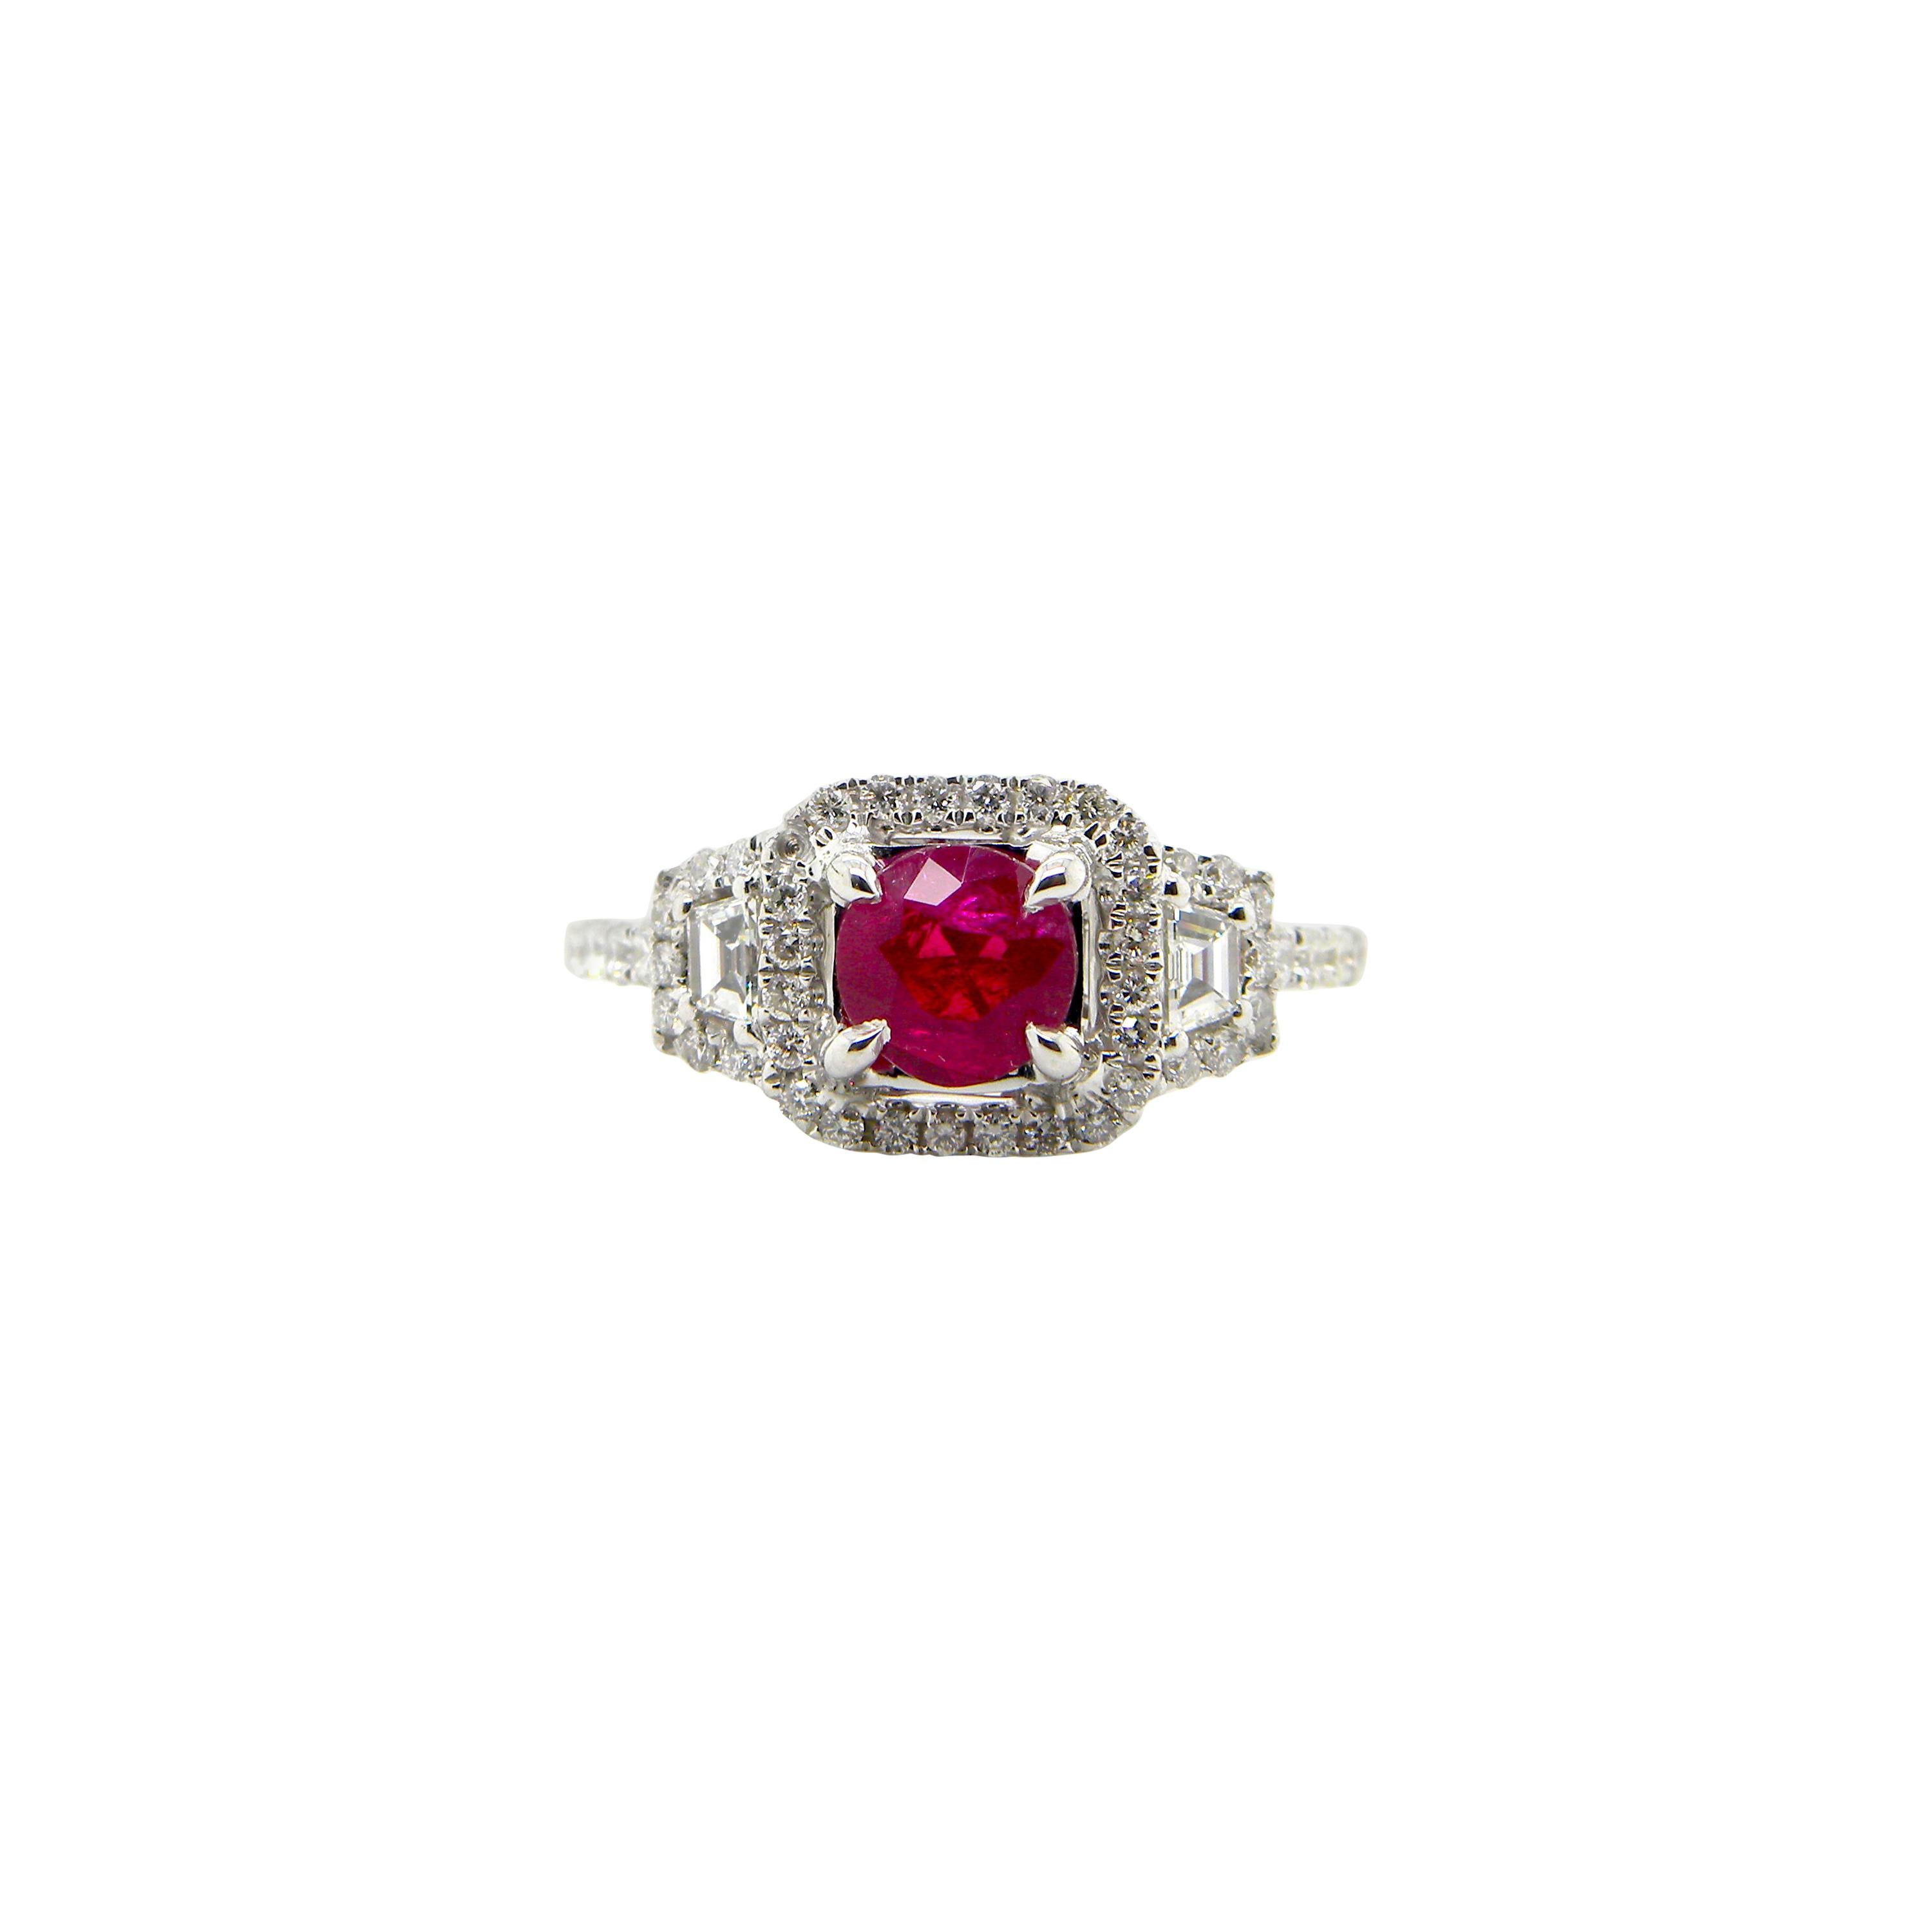 1.12 Carat GIA Certified Unheated Vivid Red Burmese Ruby and Diamond Gold Ring:

An incredibly rare ring, it features a 1.12 carat GIA certified unheated pigeon's blood red round-cut Burmese ruby with two white baguette diamonds on the sides